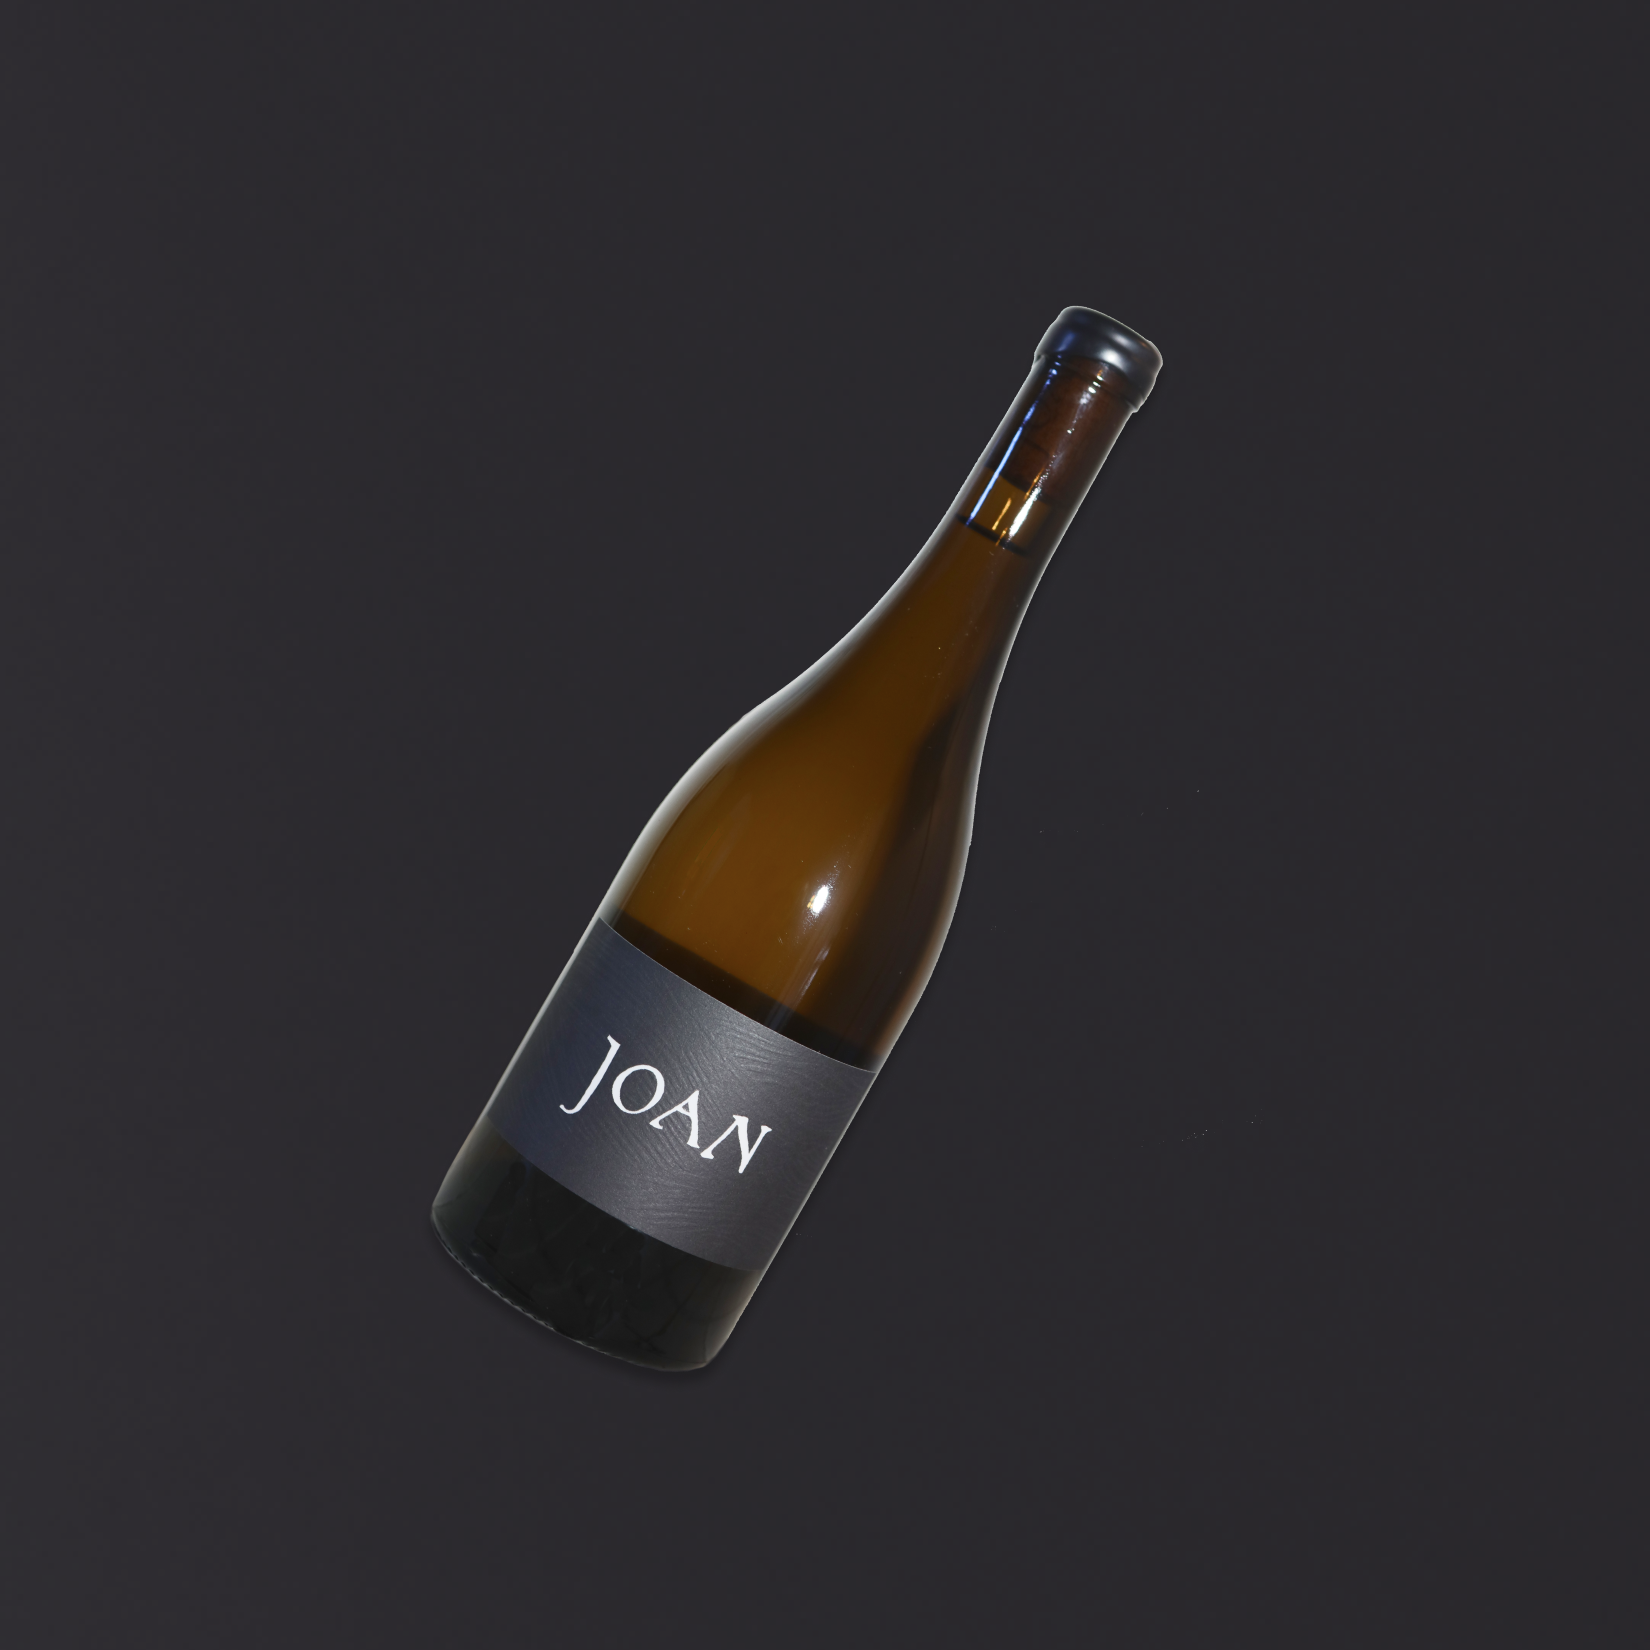 Joan 2020 Chardonnay - SOLD OUT